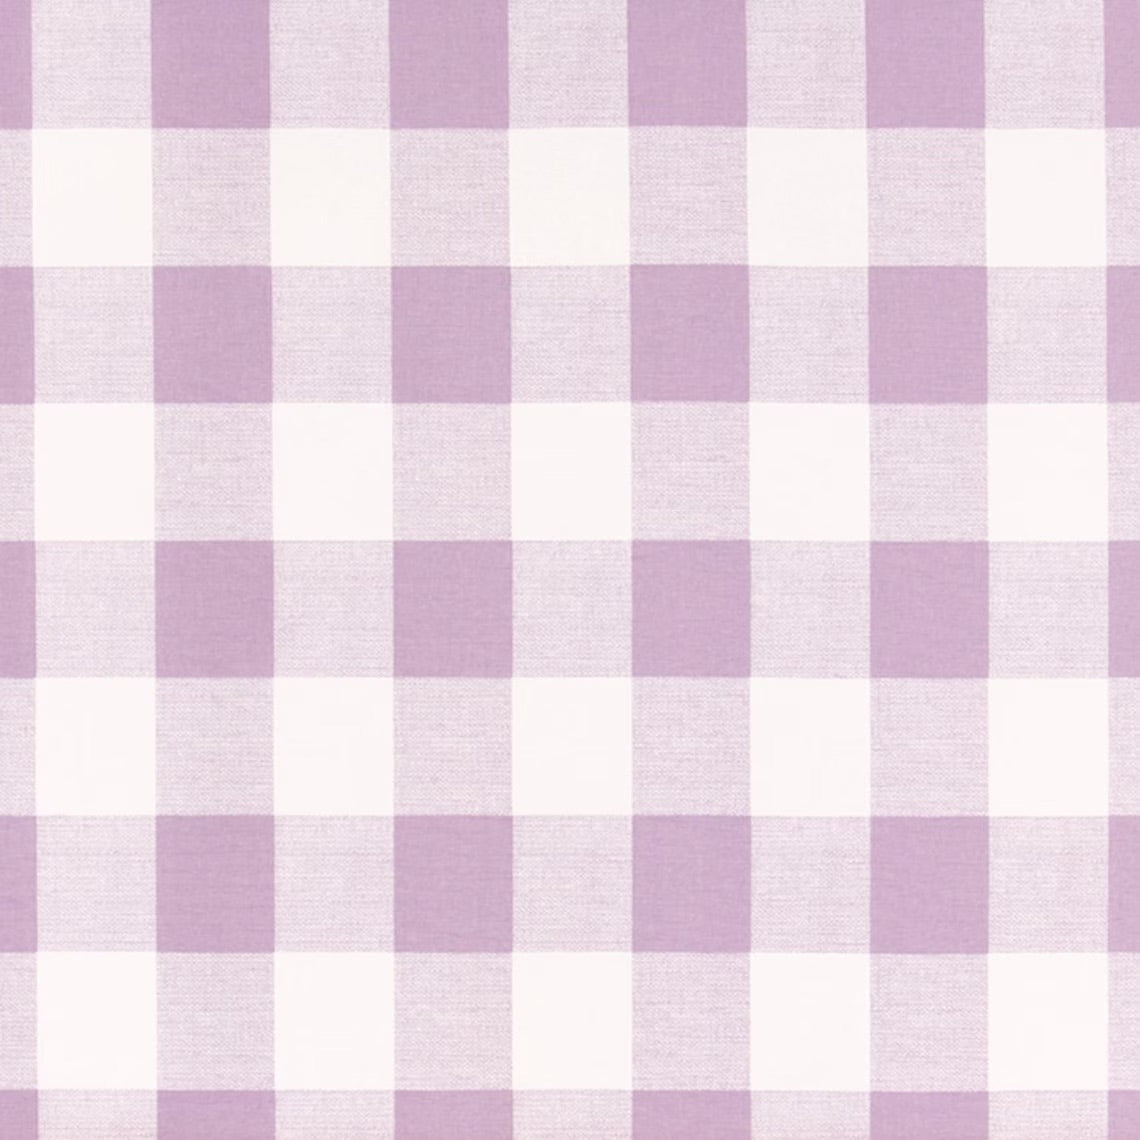 Tailored Crib Skirt in Bella Pink Large Gingham Check on White Plaid